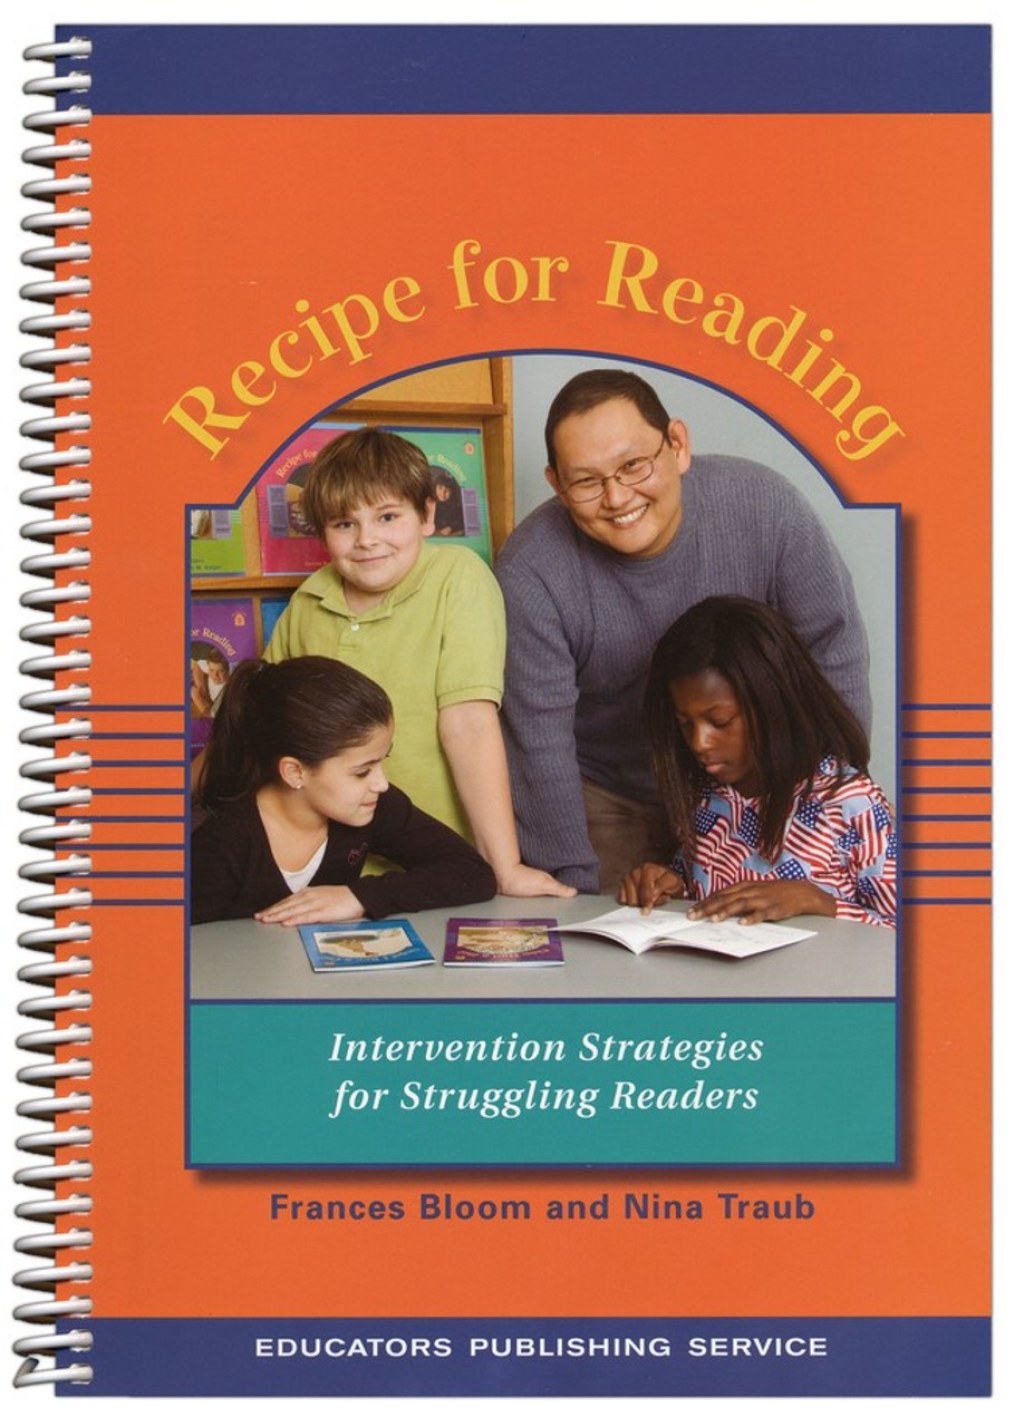 Picture of: Recipe for Reading Manual